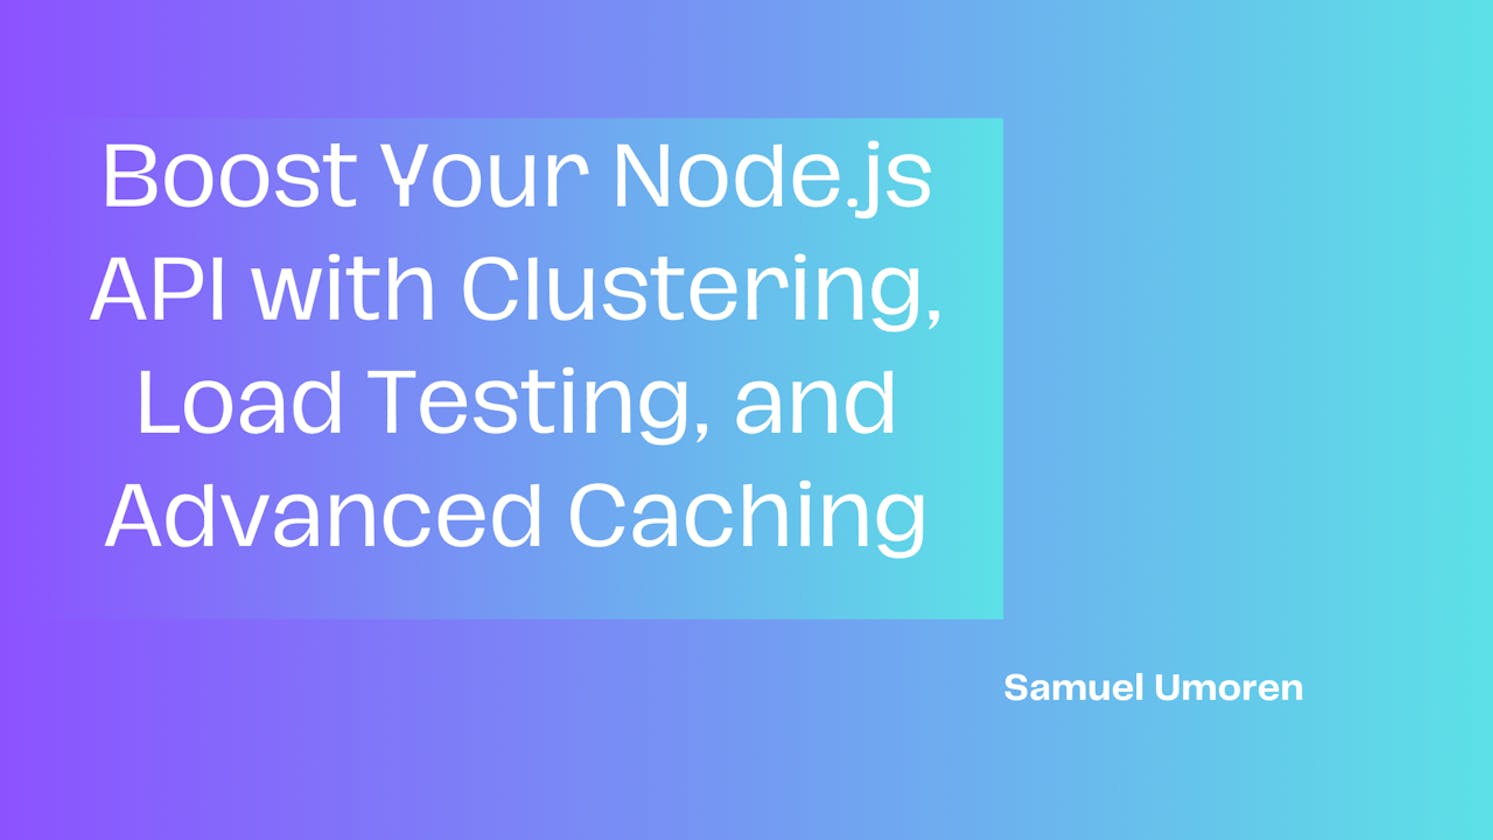 Optimize Your Node.js API with Clustering, Load Testing, and Advanced Caching